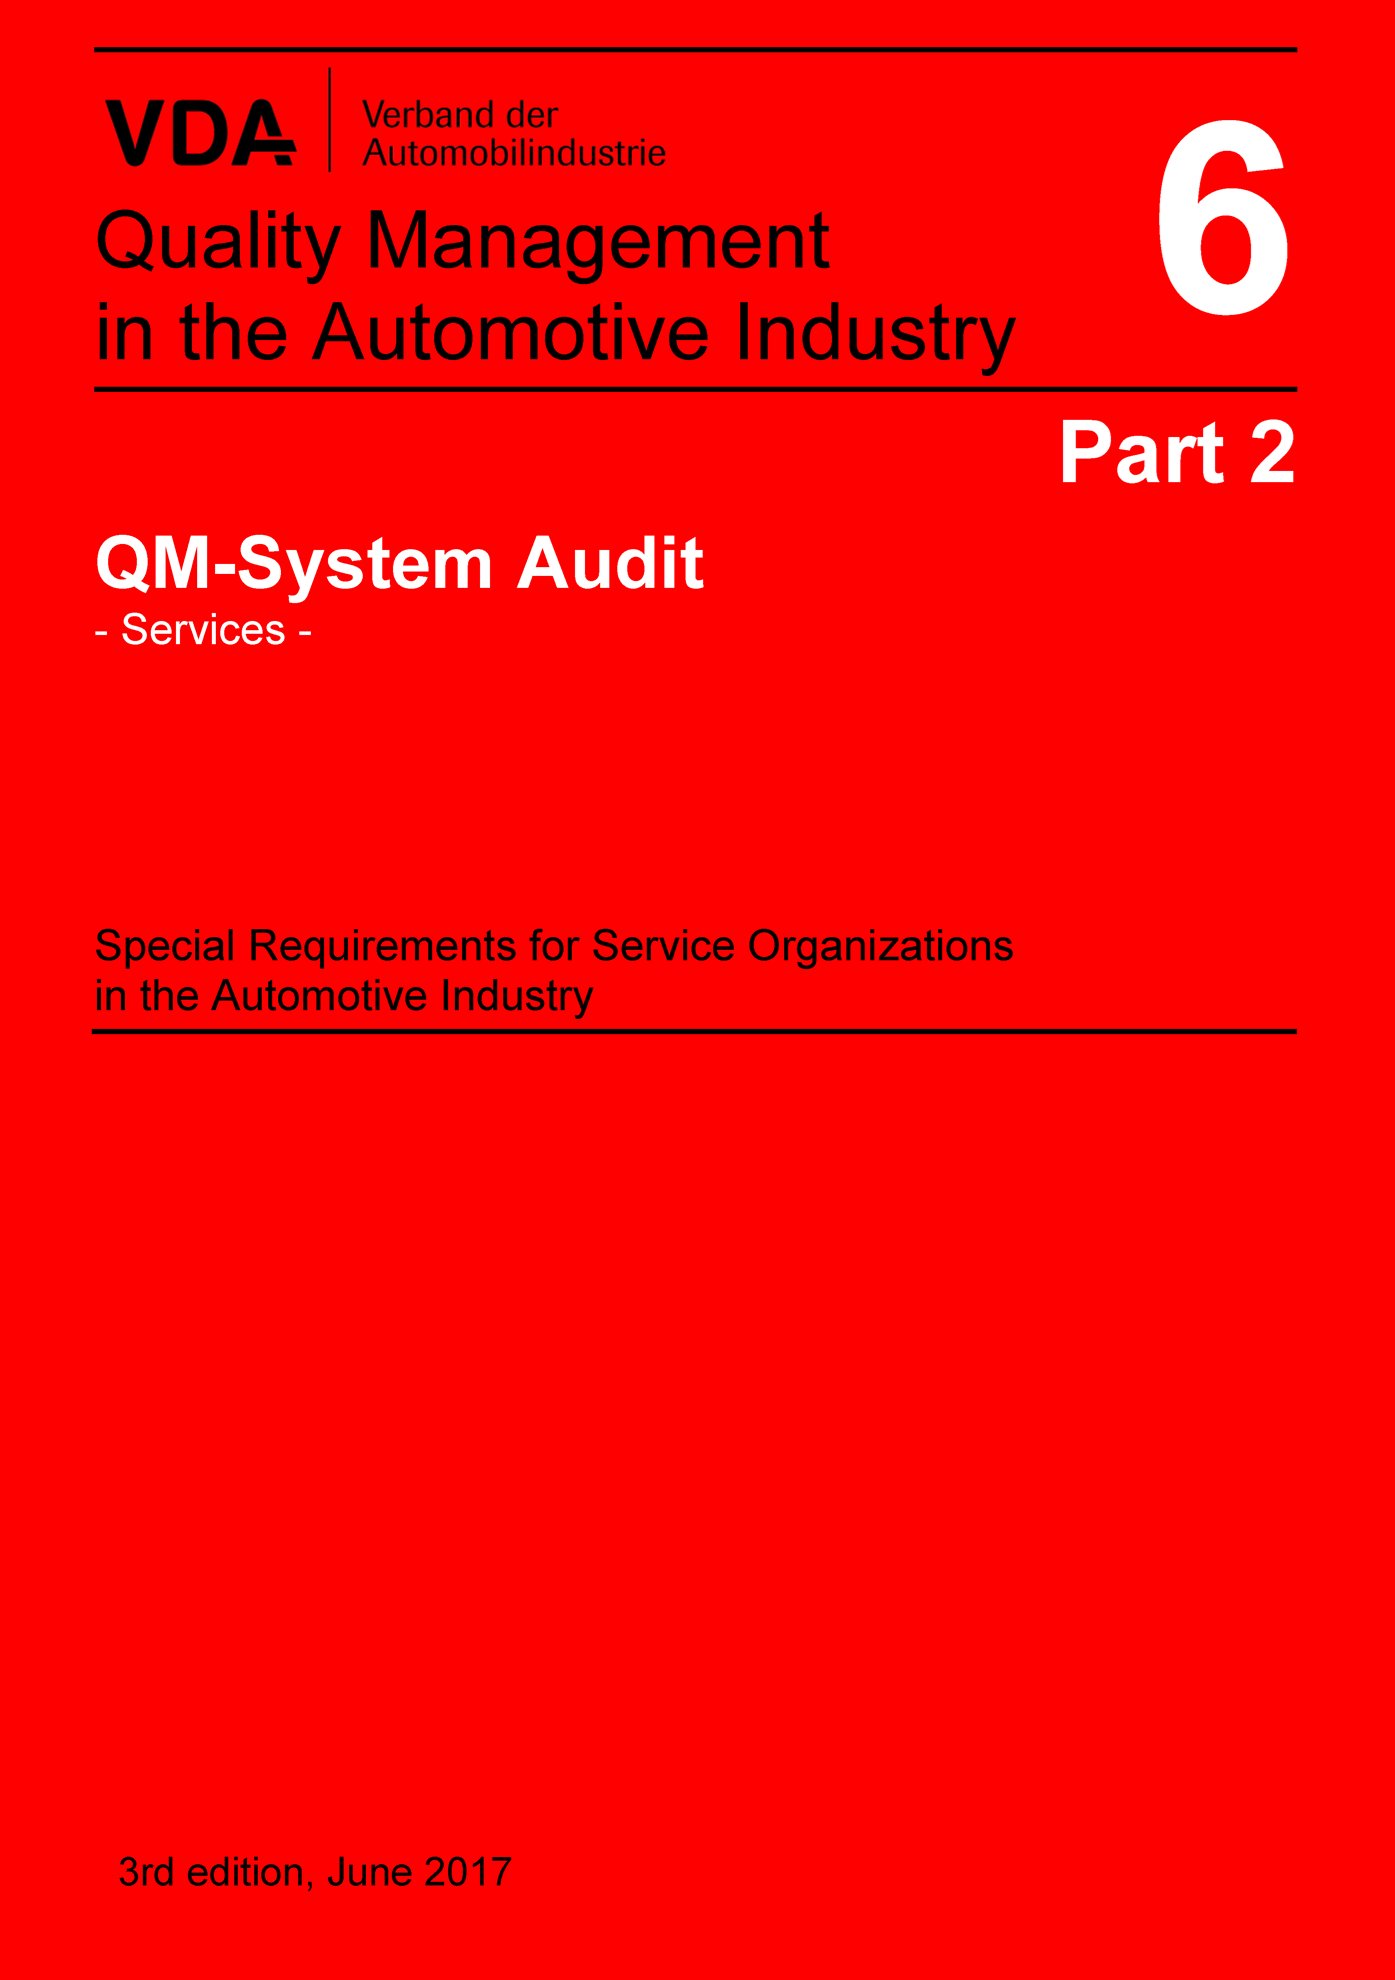 Publikácie  VDA Volume 6 Part 2_QM System Audit - Services -
 Special Requirements for Service Organizations in the Automotive Industry
 3rd Edition, June 2017 1.6.2017 náhľad